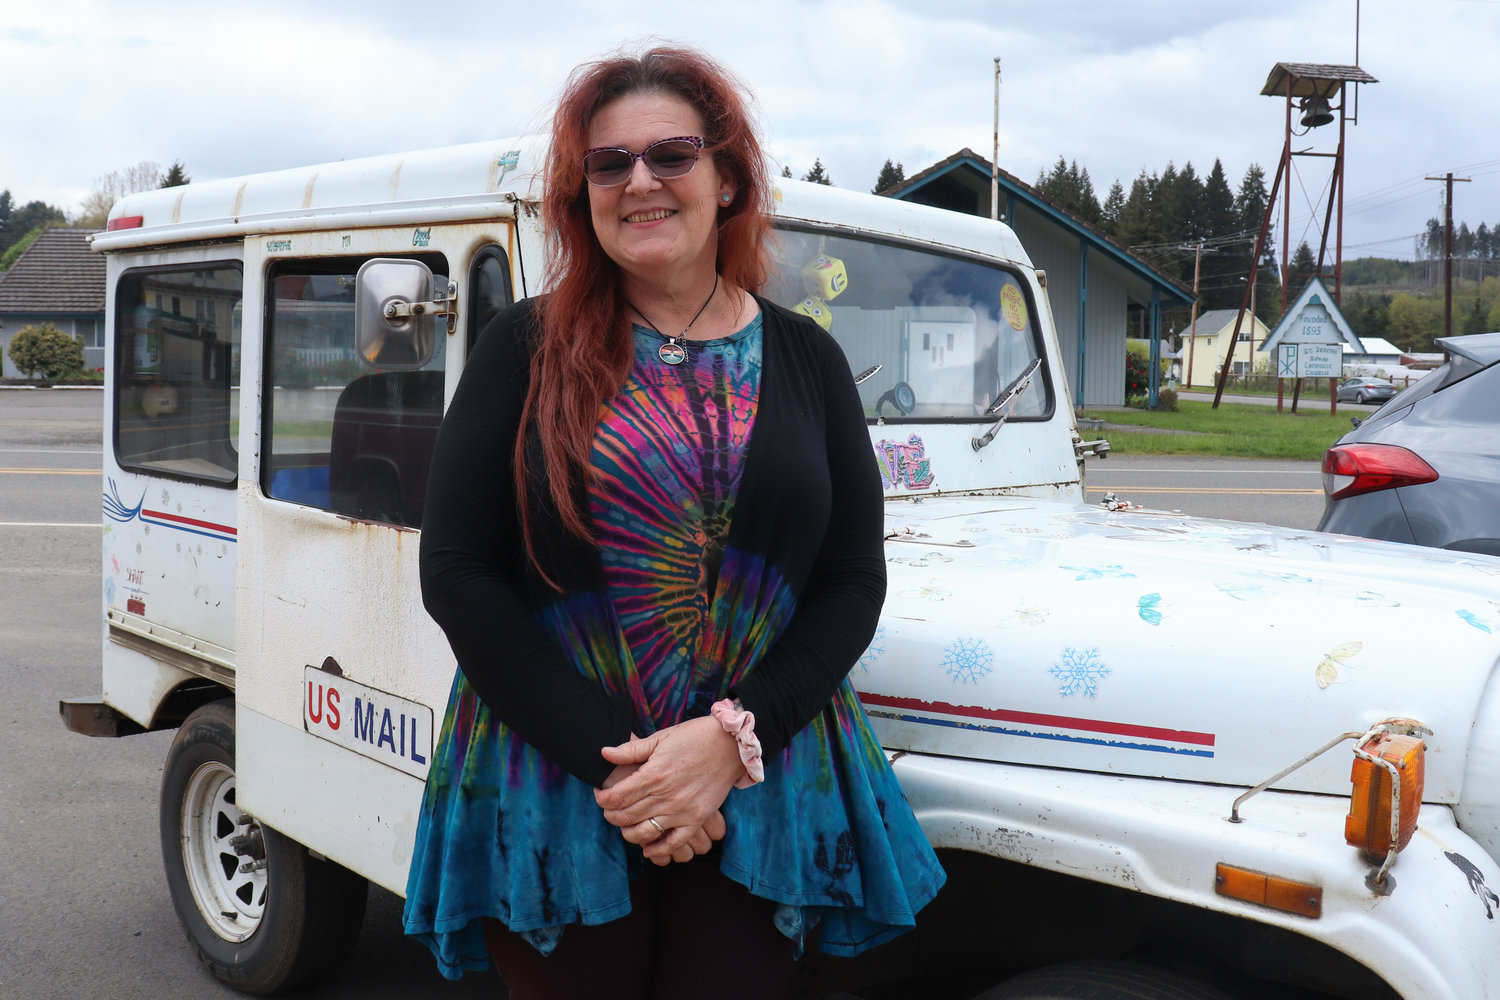 Lisa-Marie Wilson poses for a photograph beside one of her mail delivery vehicles in this photograph captured last week in Pe Ell.